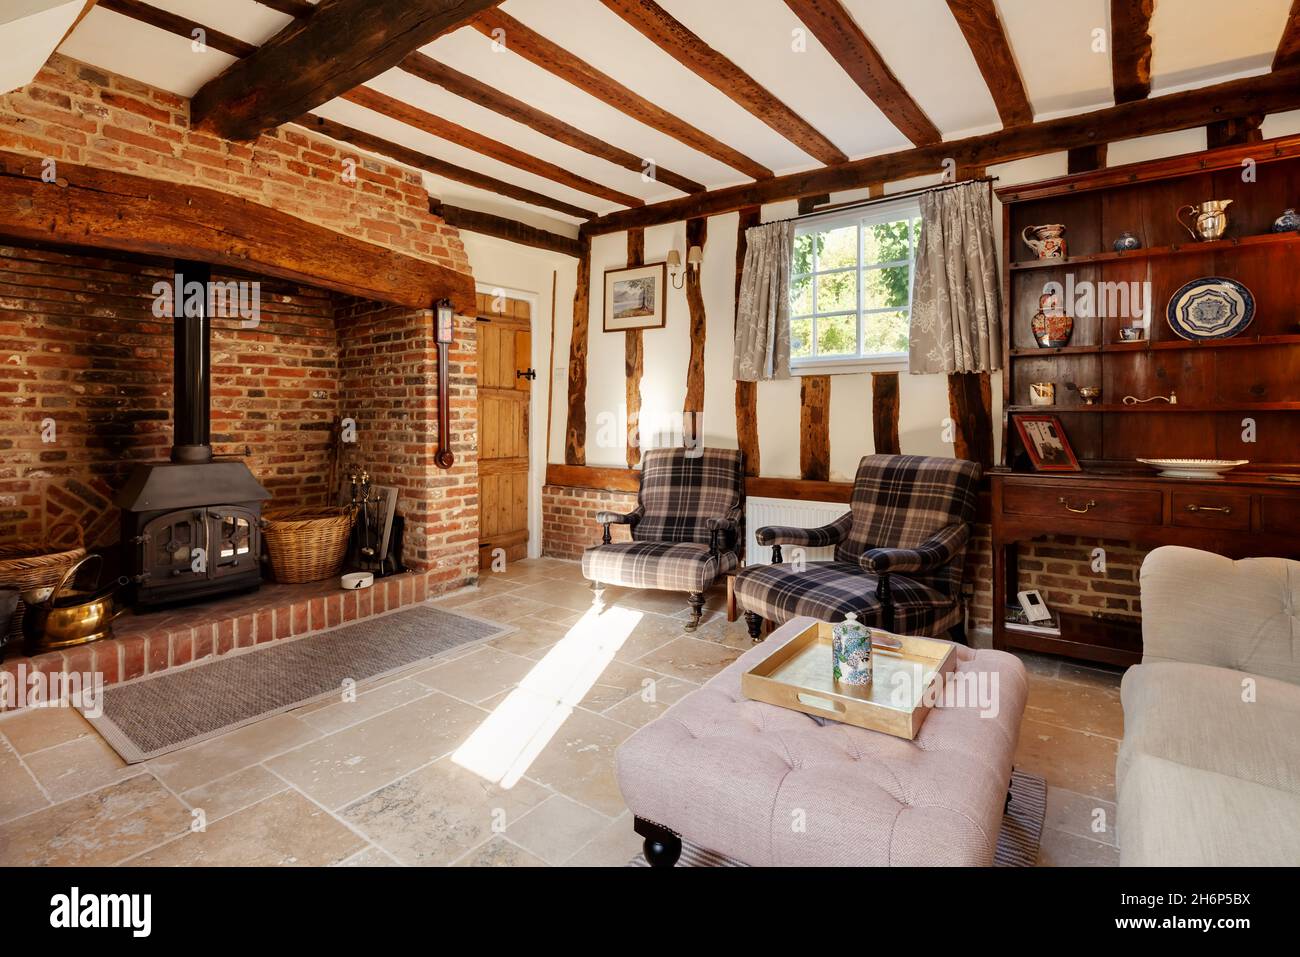 Stoke By Clare, England October 17 2019: Living room interior inside traditional english cottage with exposed brickwork and beams, inglenook fireplace Stock Photo